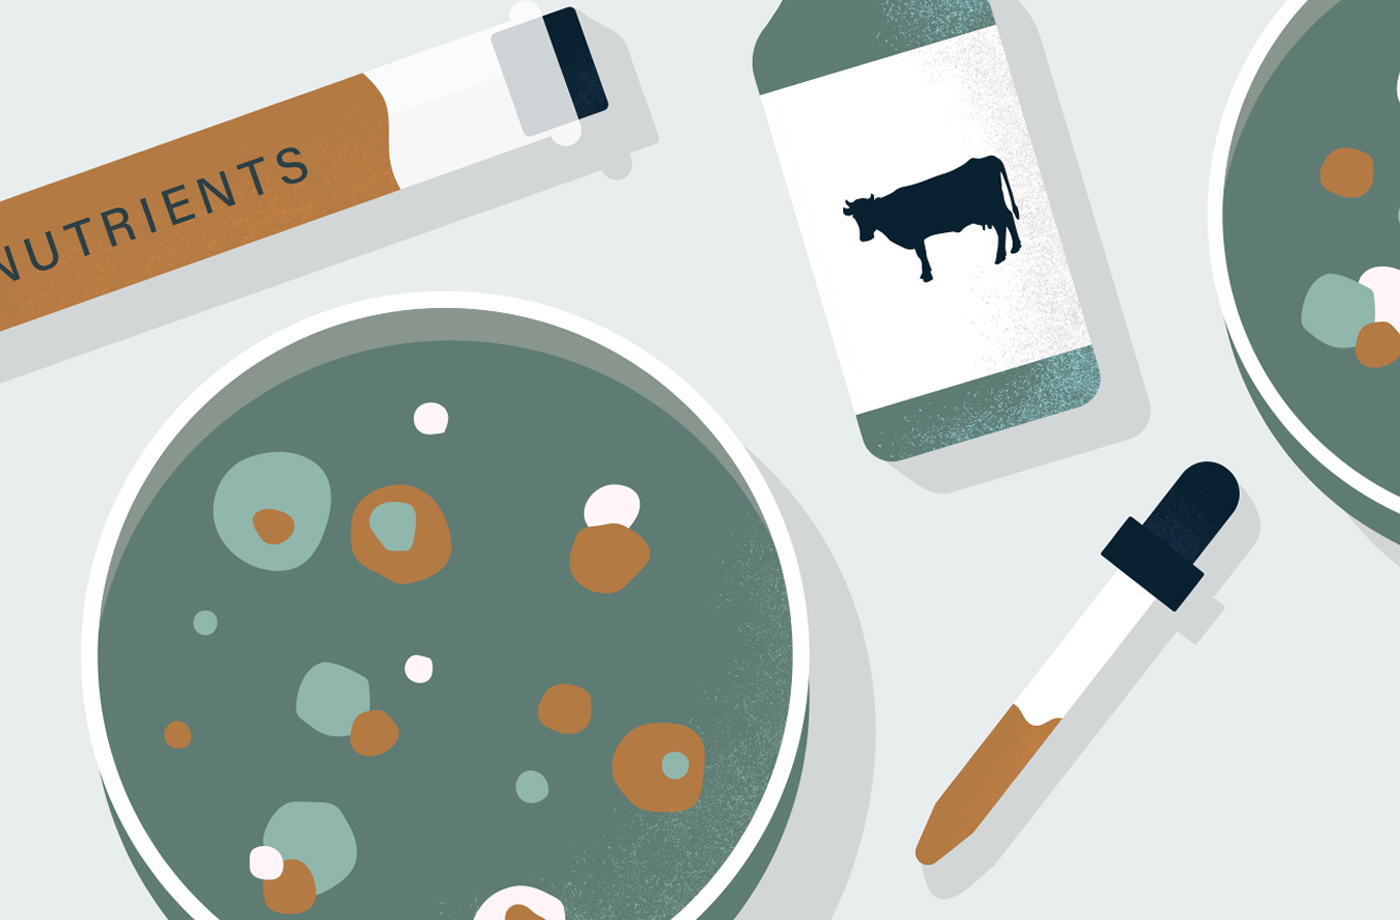 Why some experts think lab-grown, ‘cultured’ meat is the sustainable future of protein